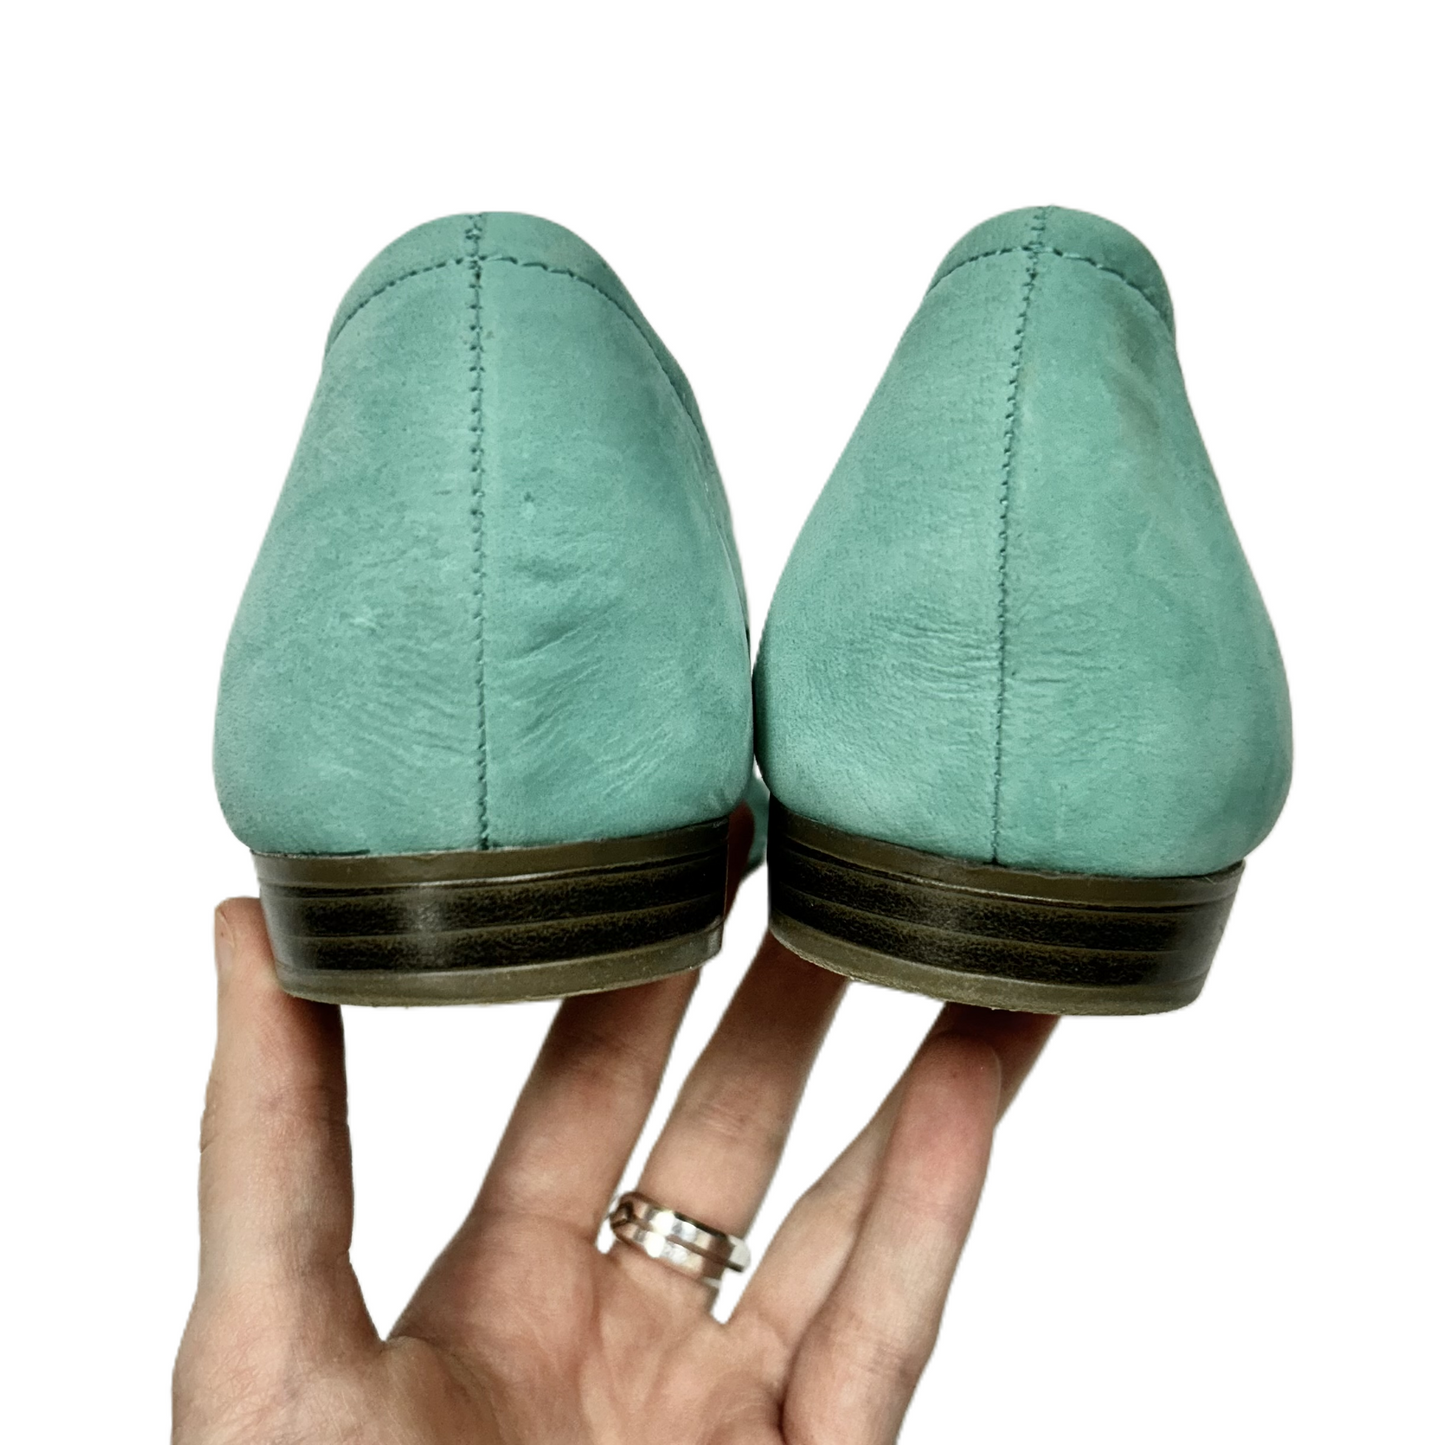 Teal Shoes Flats By Naturalizer, Size: 8.5